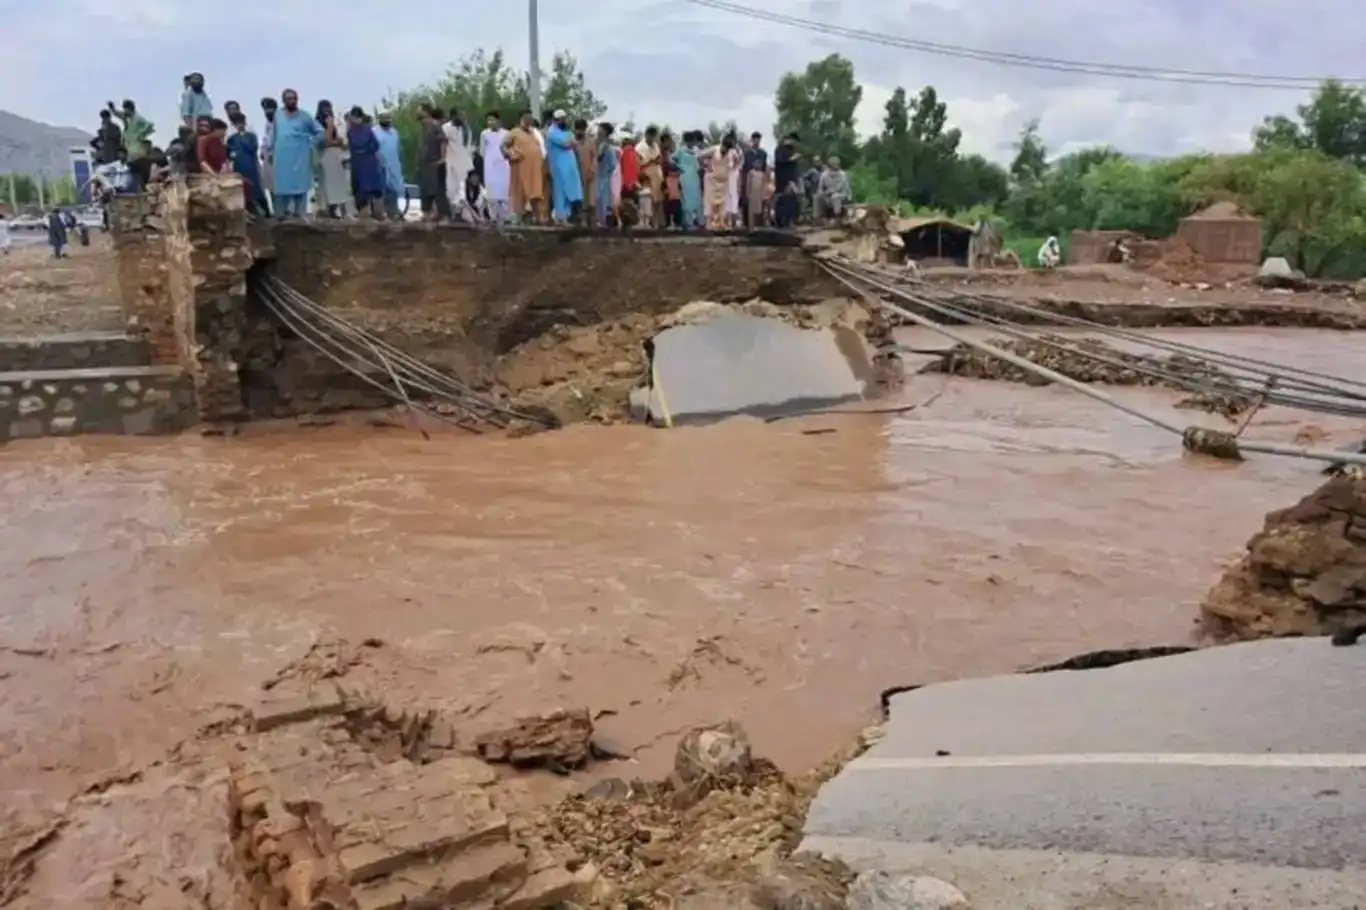 Death toll from flooding rises to 40 in eastern Afghanistan